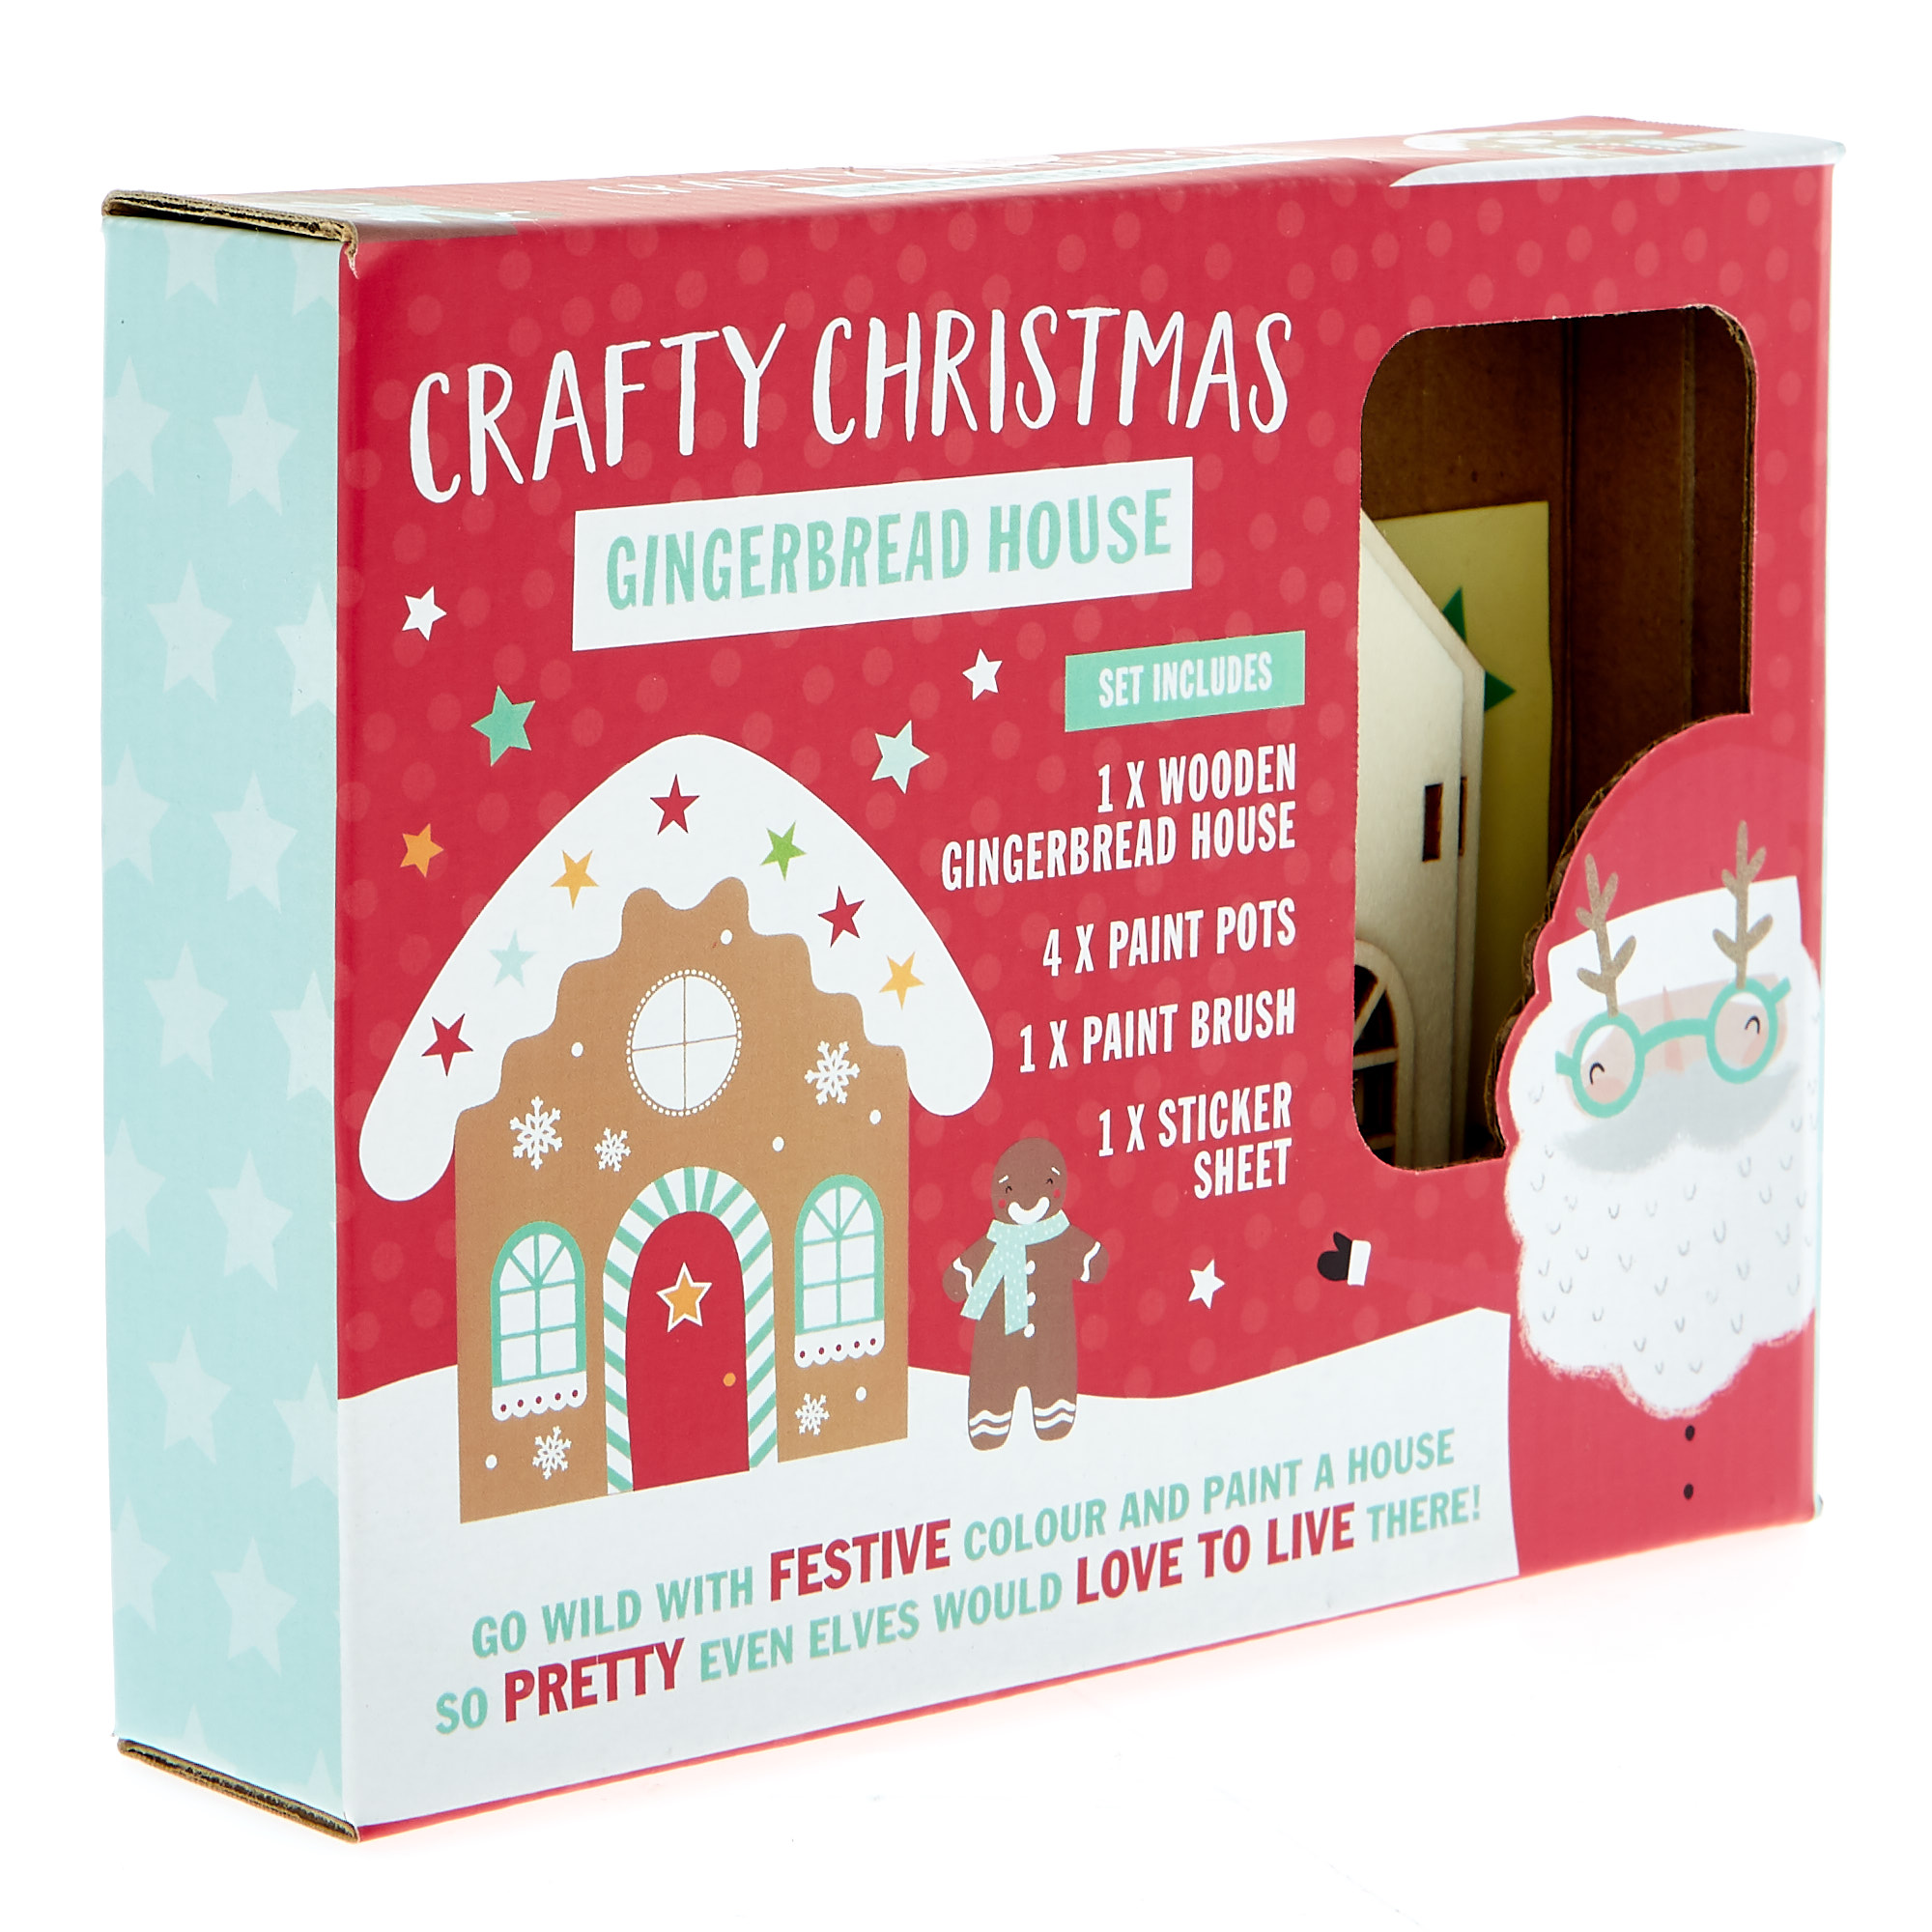 Crafty Christmas Gingerbread House Kit